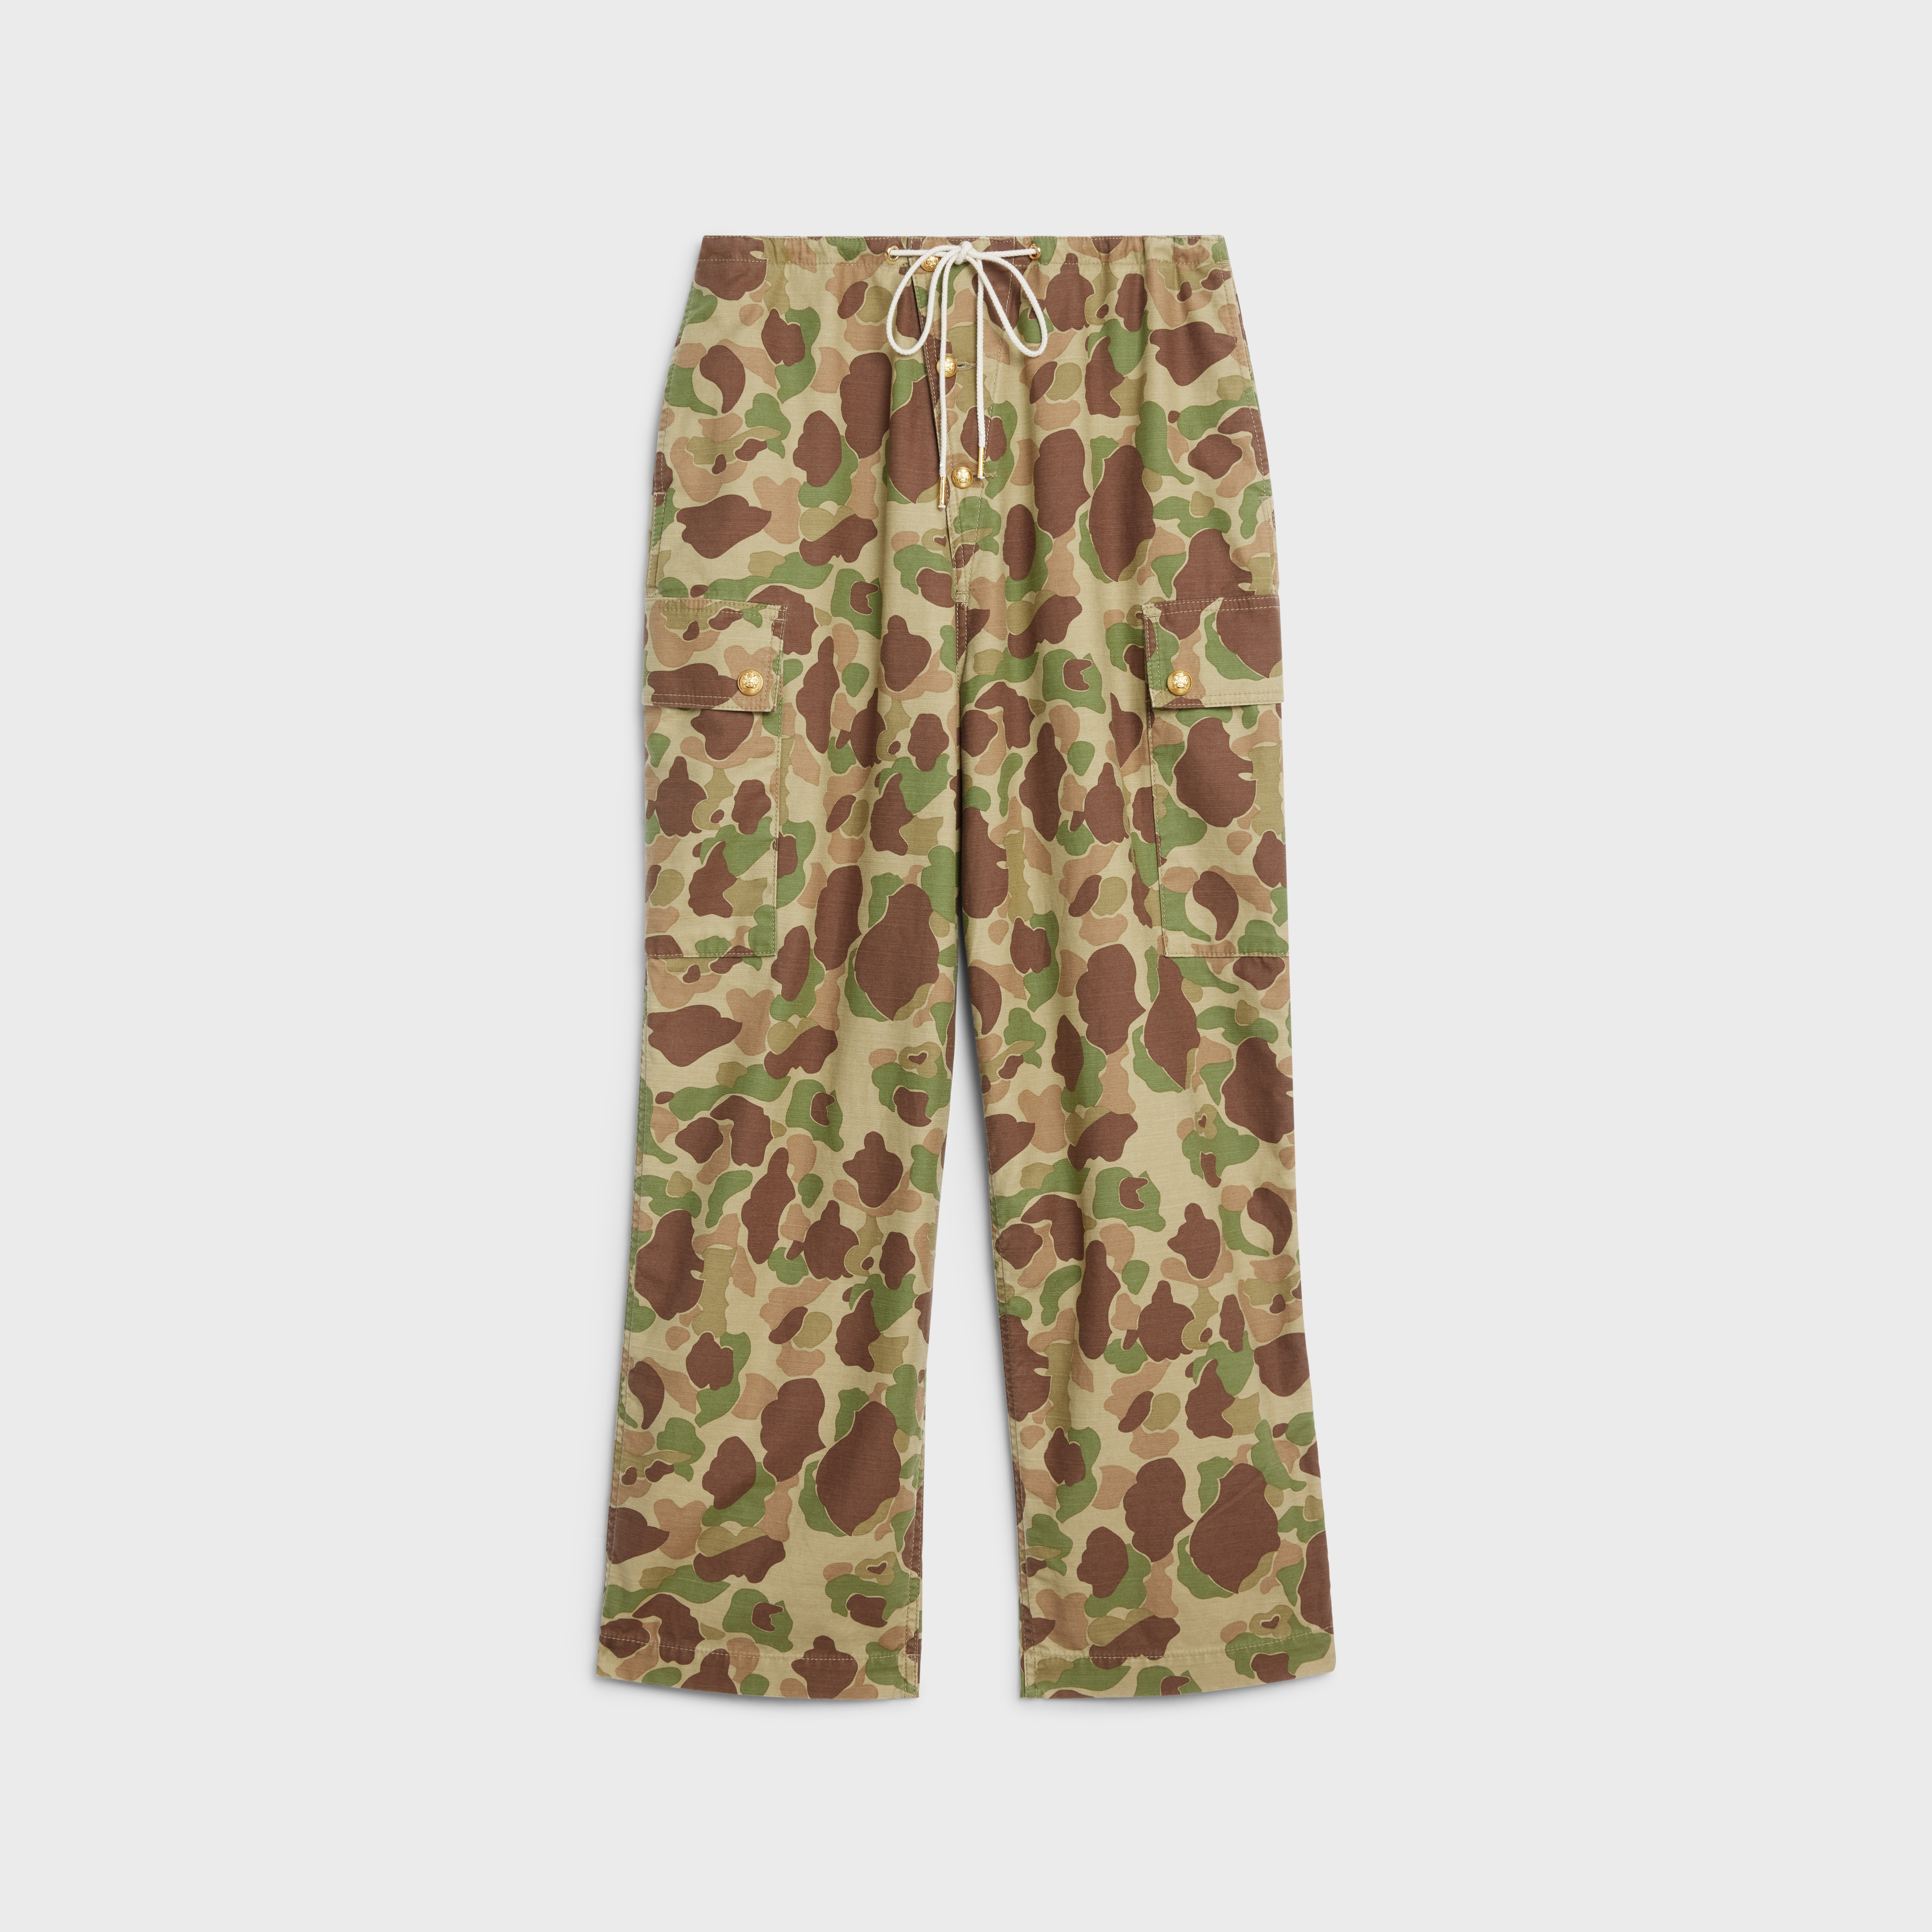 CARGO PANTS IN CAMOUFLAGE COTTON - 1